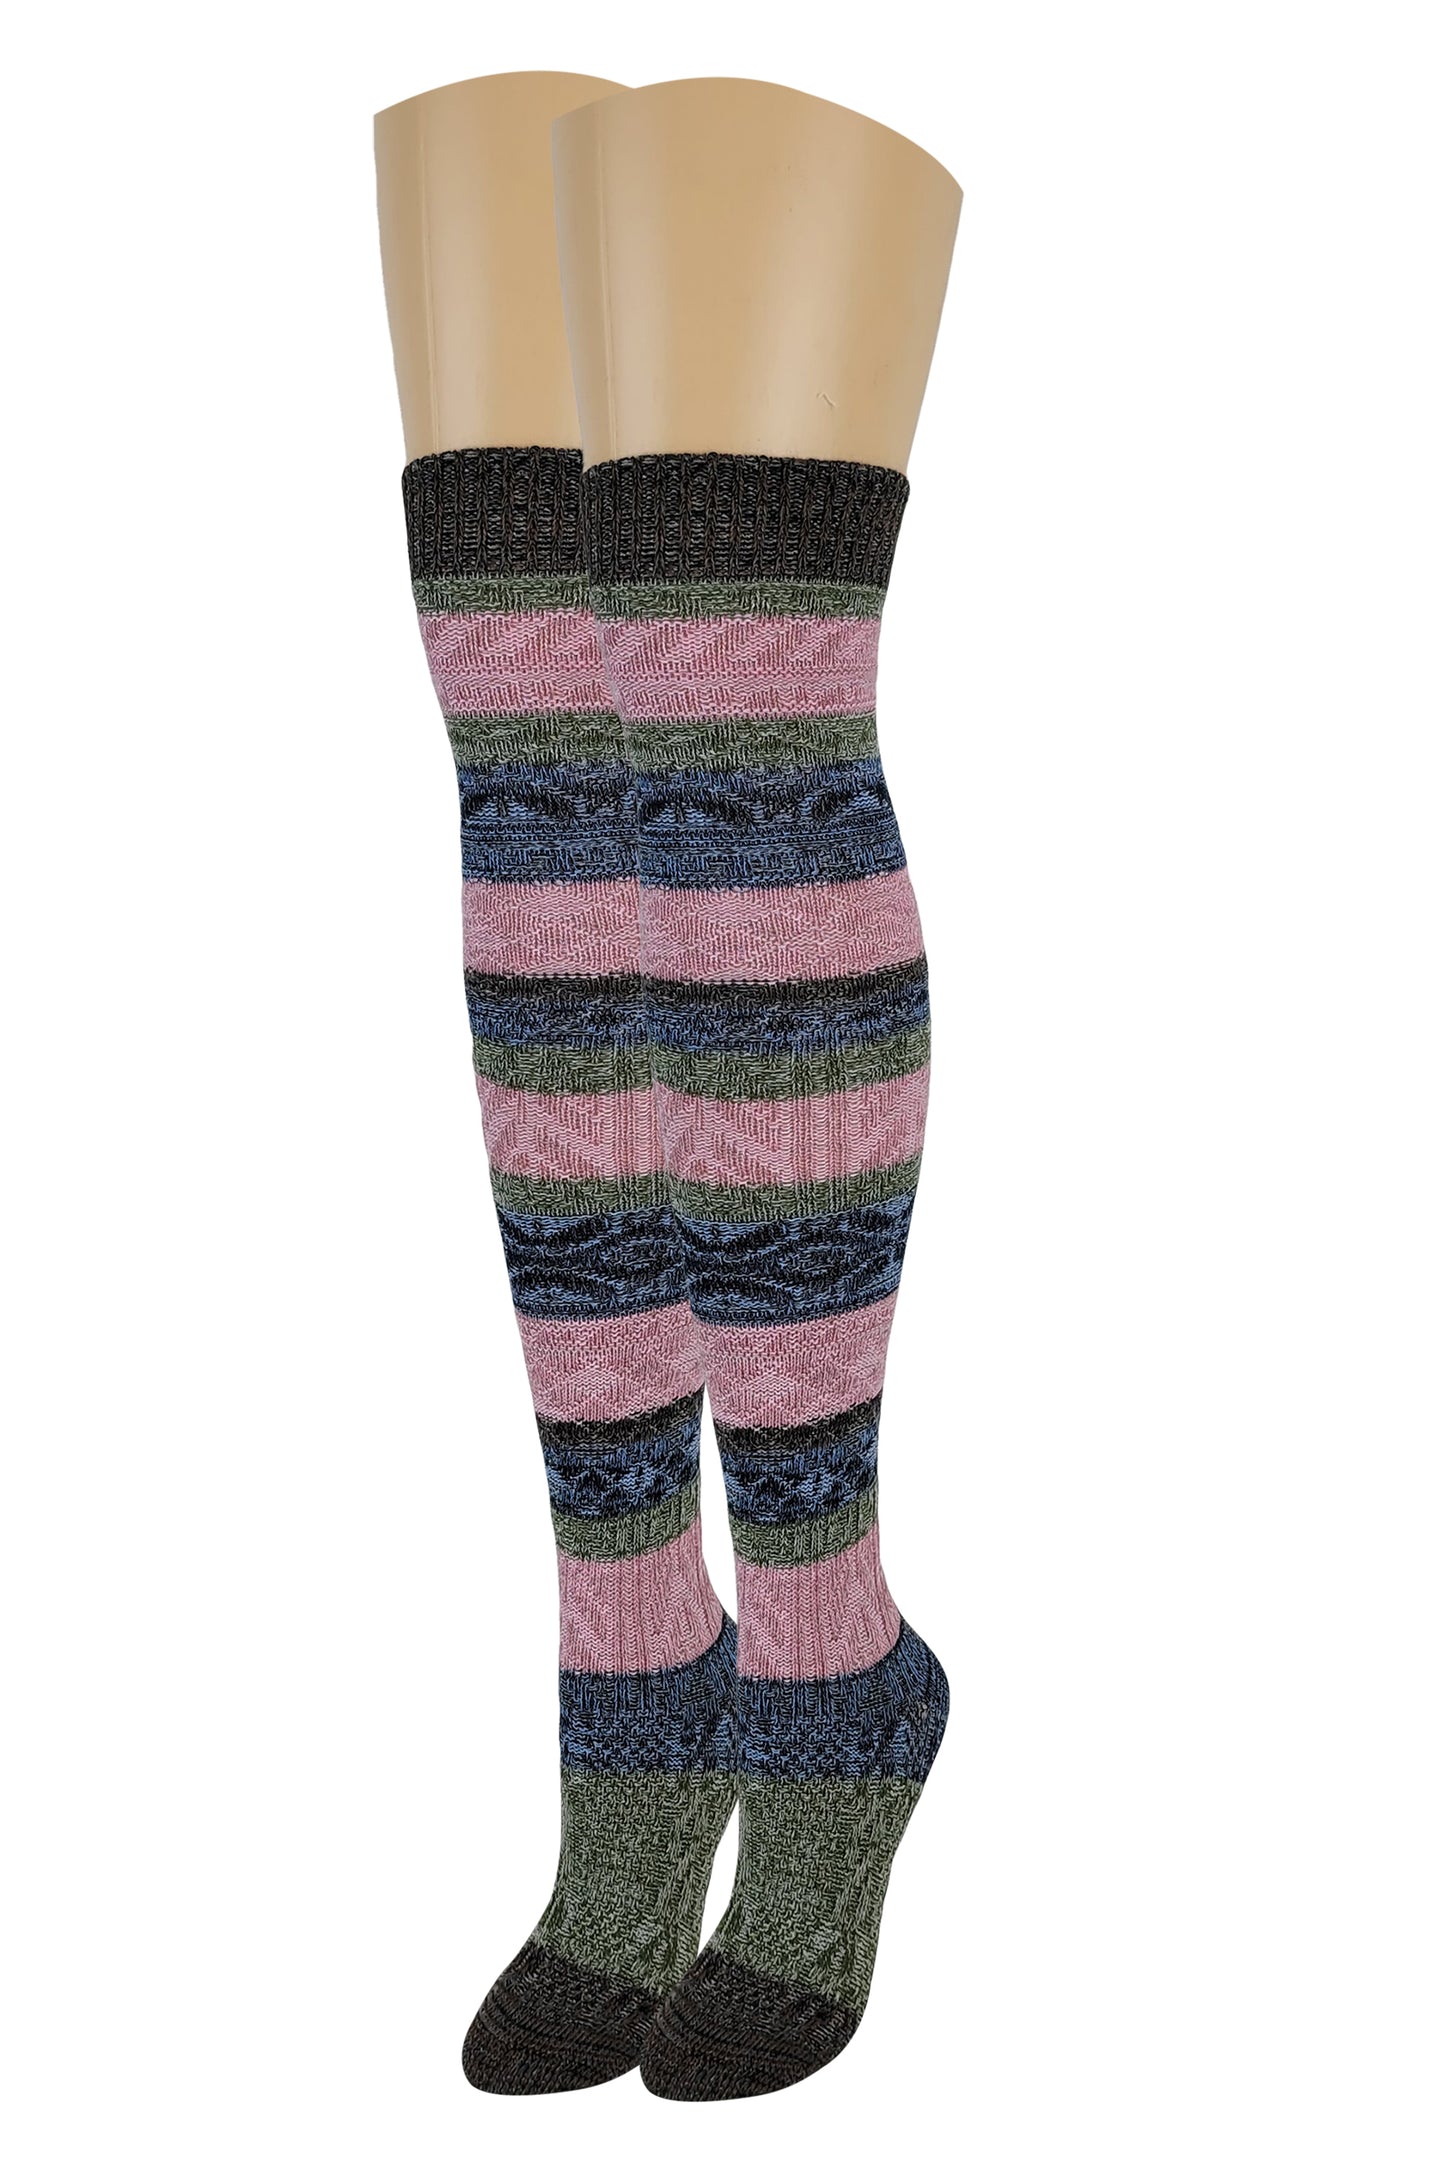 Over the Knee Socks | Assorted Color (4 Pairs)